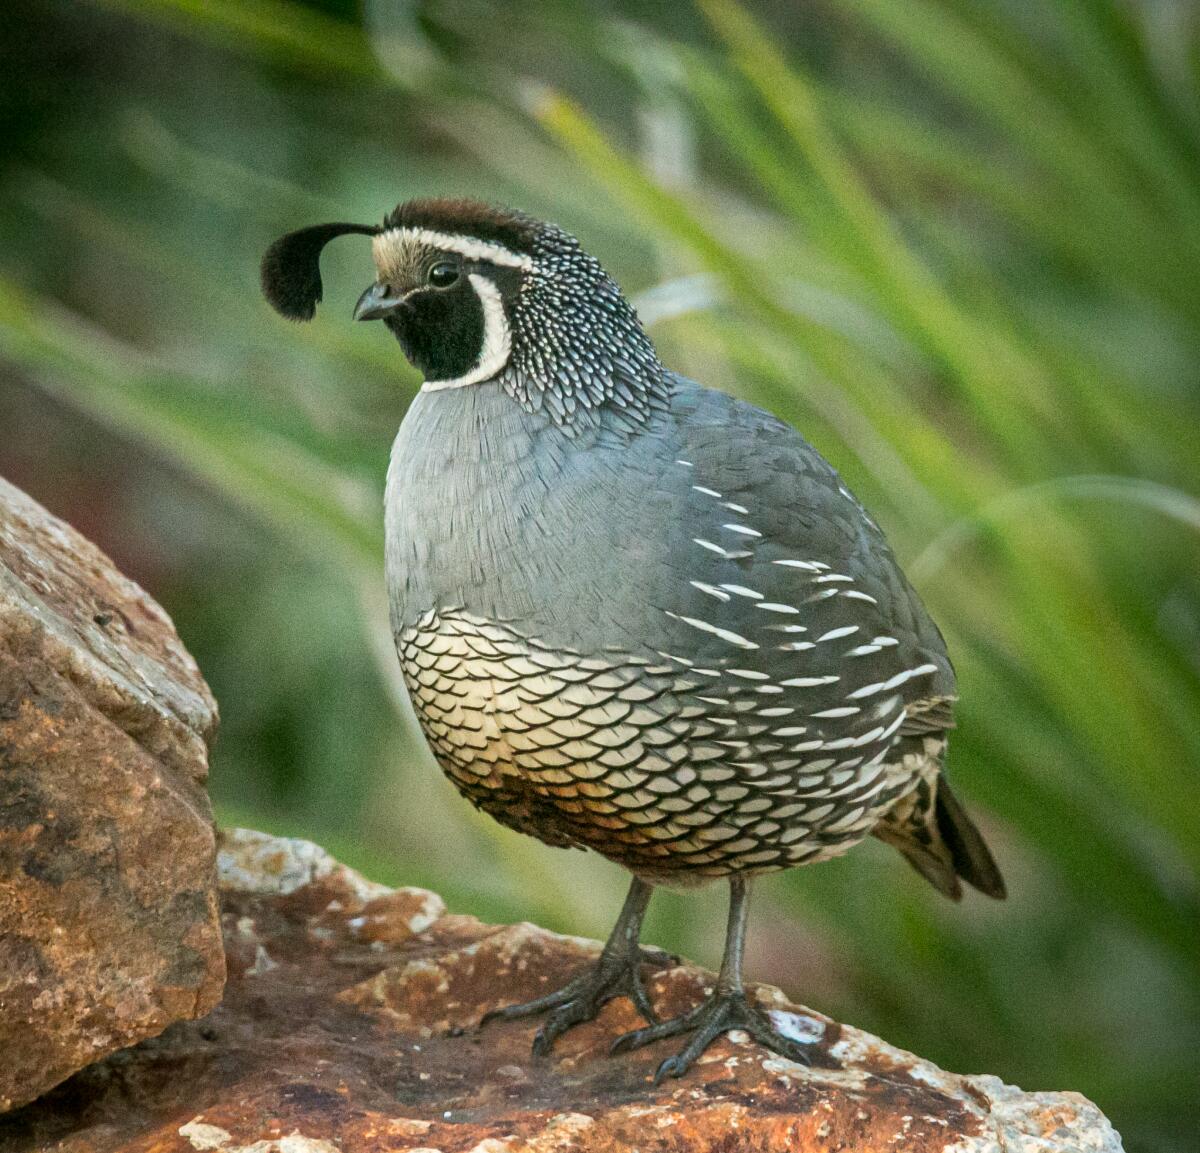 A male quail being a lookout.